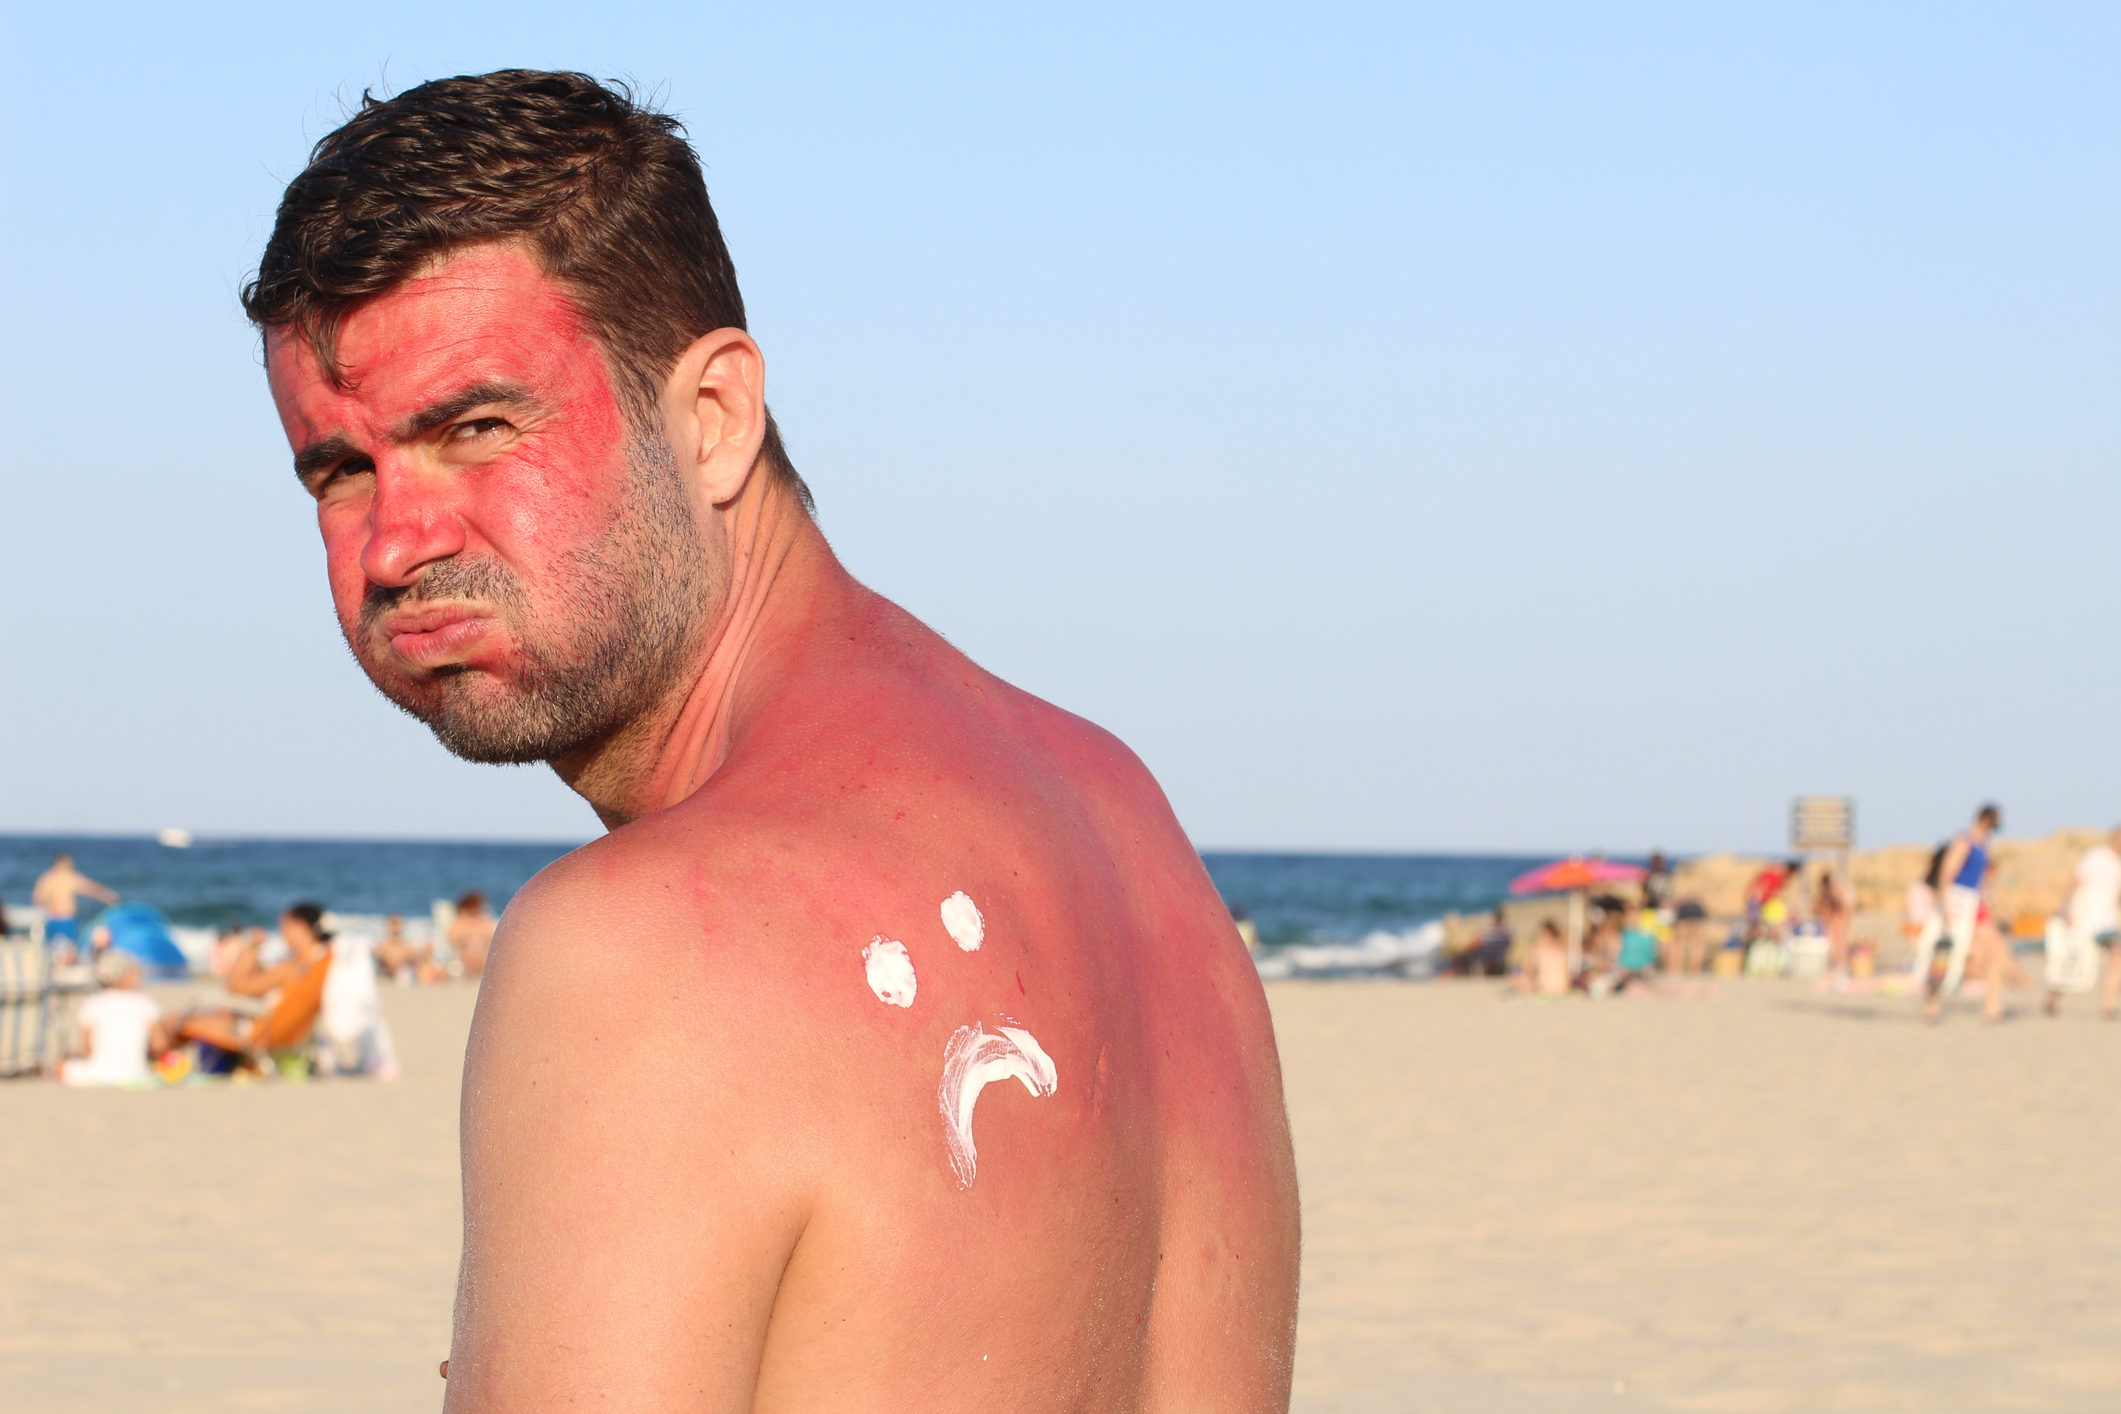 Man getting sunburned at the beach. (Photo: iStock - ajr_images)